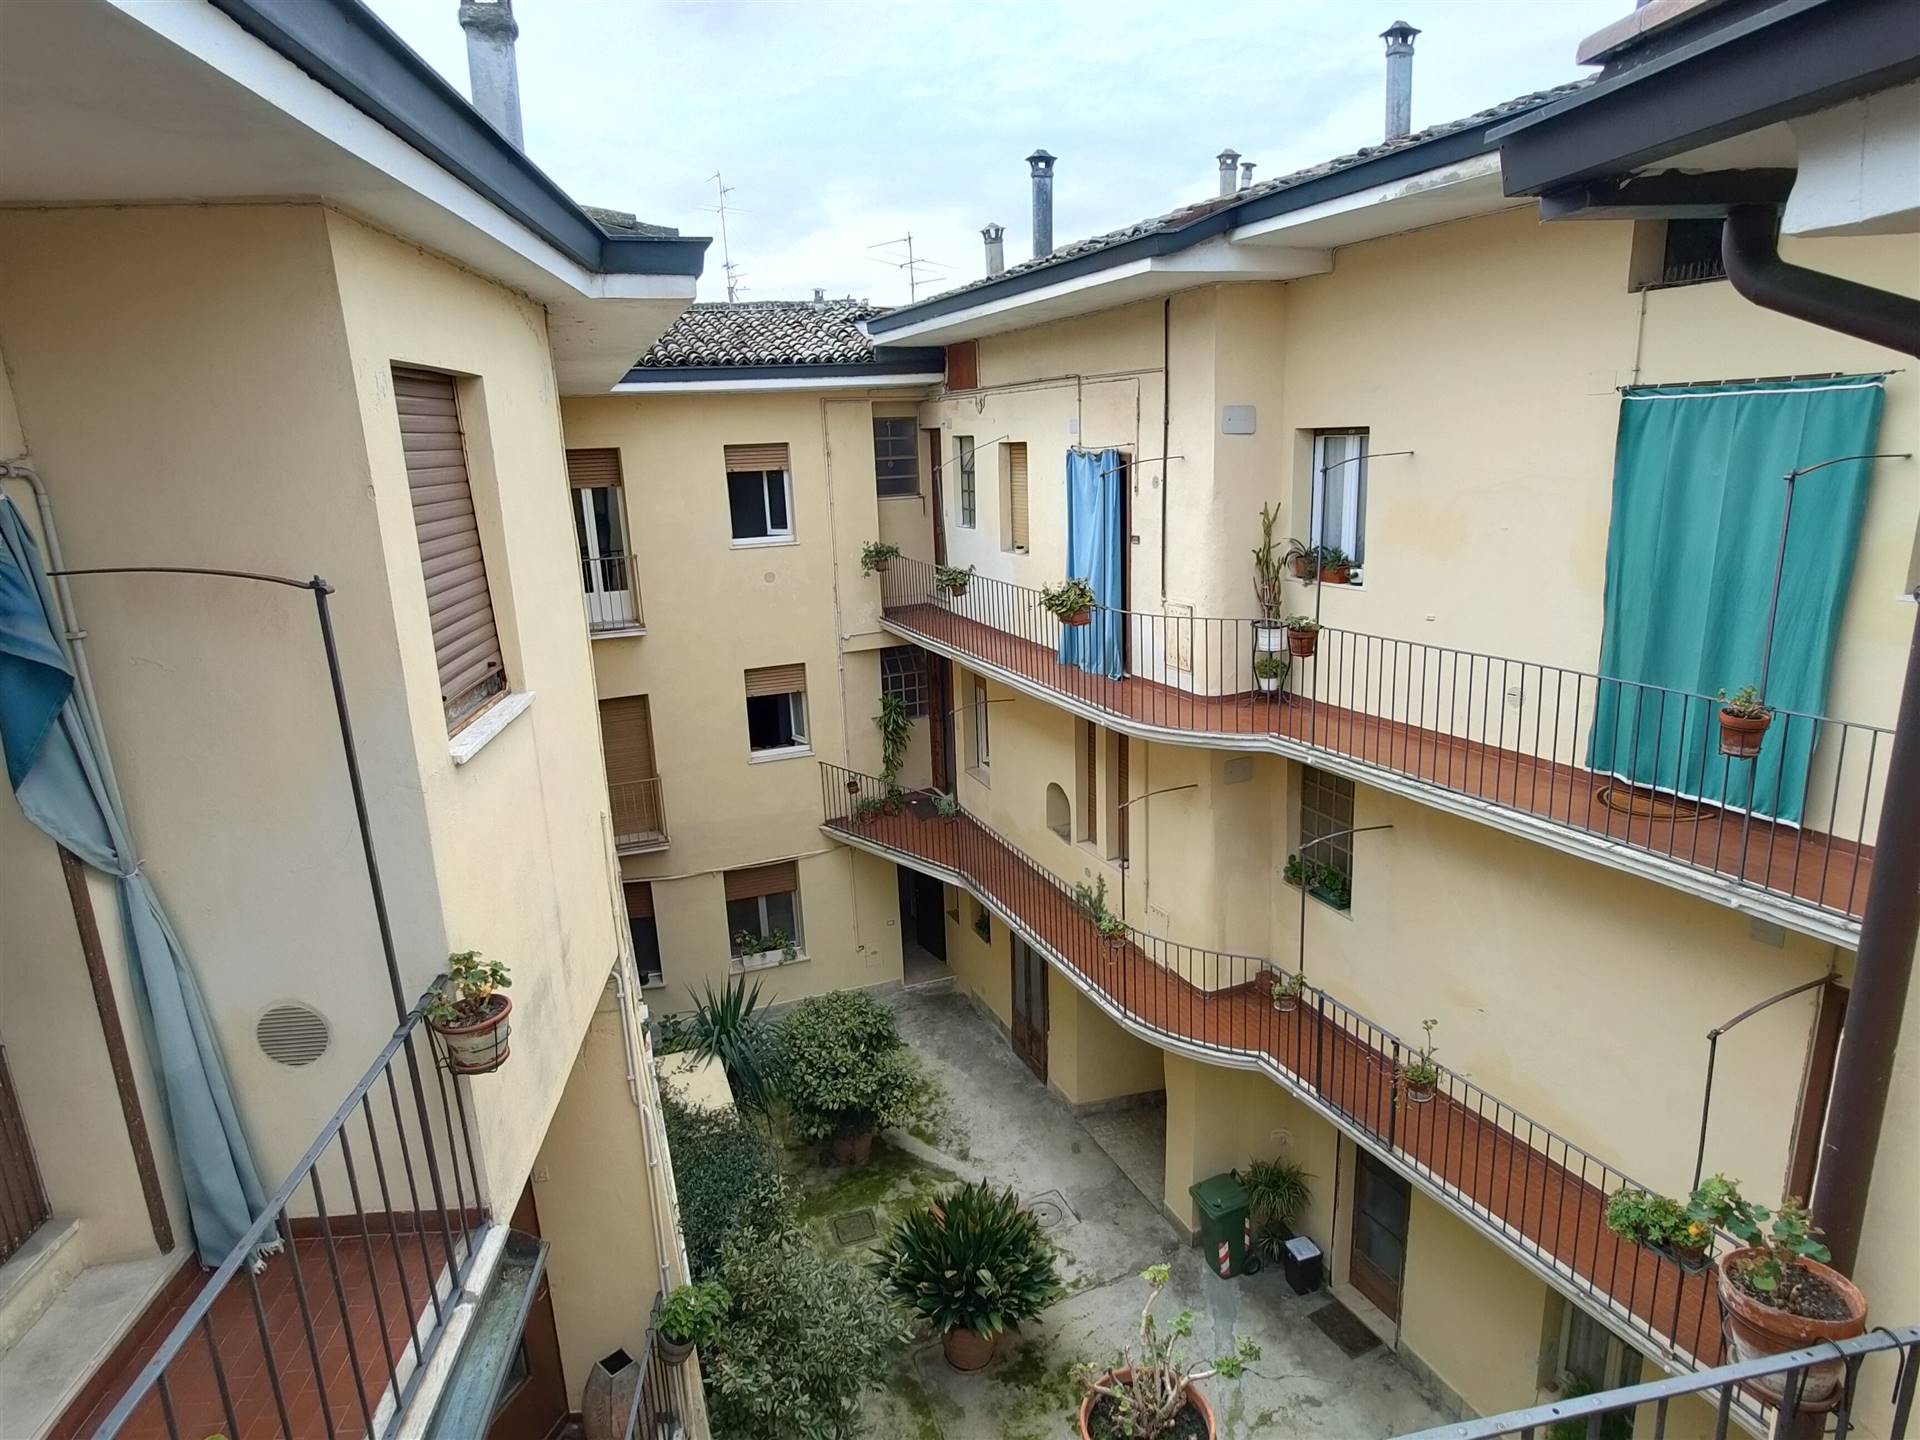 CITTÀ BASSA, LODI, Palace for sale of 680 Sq. mt., Energetic class: G, composed by: 40 Rooms, 30 Bedrooms, 13 Bathrooms, Cellar, Price: € 630,000